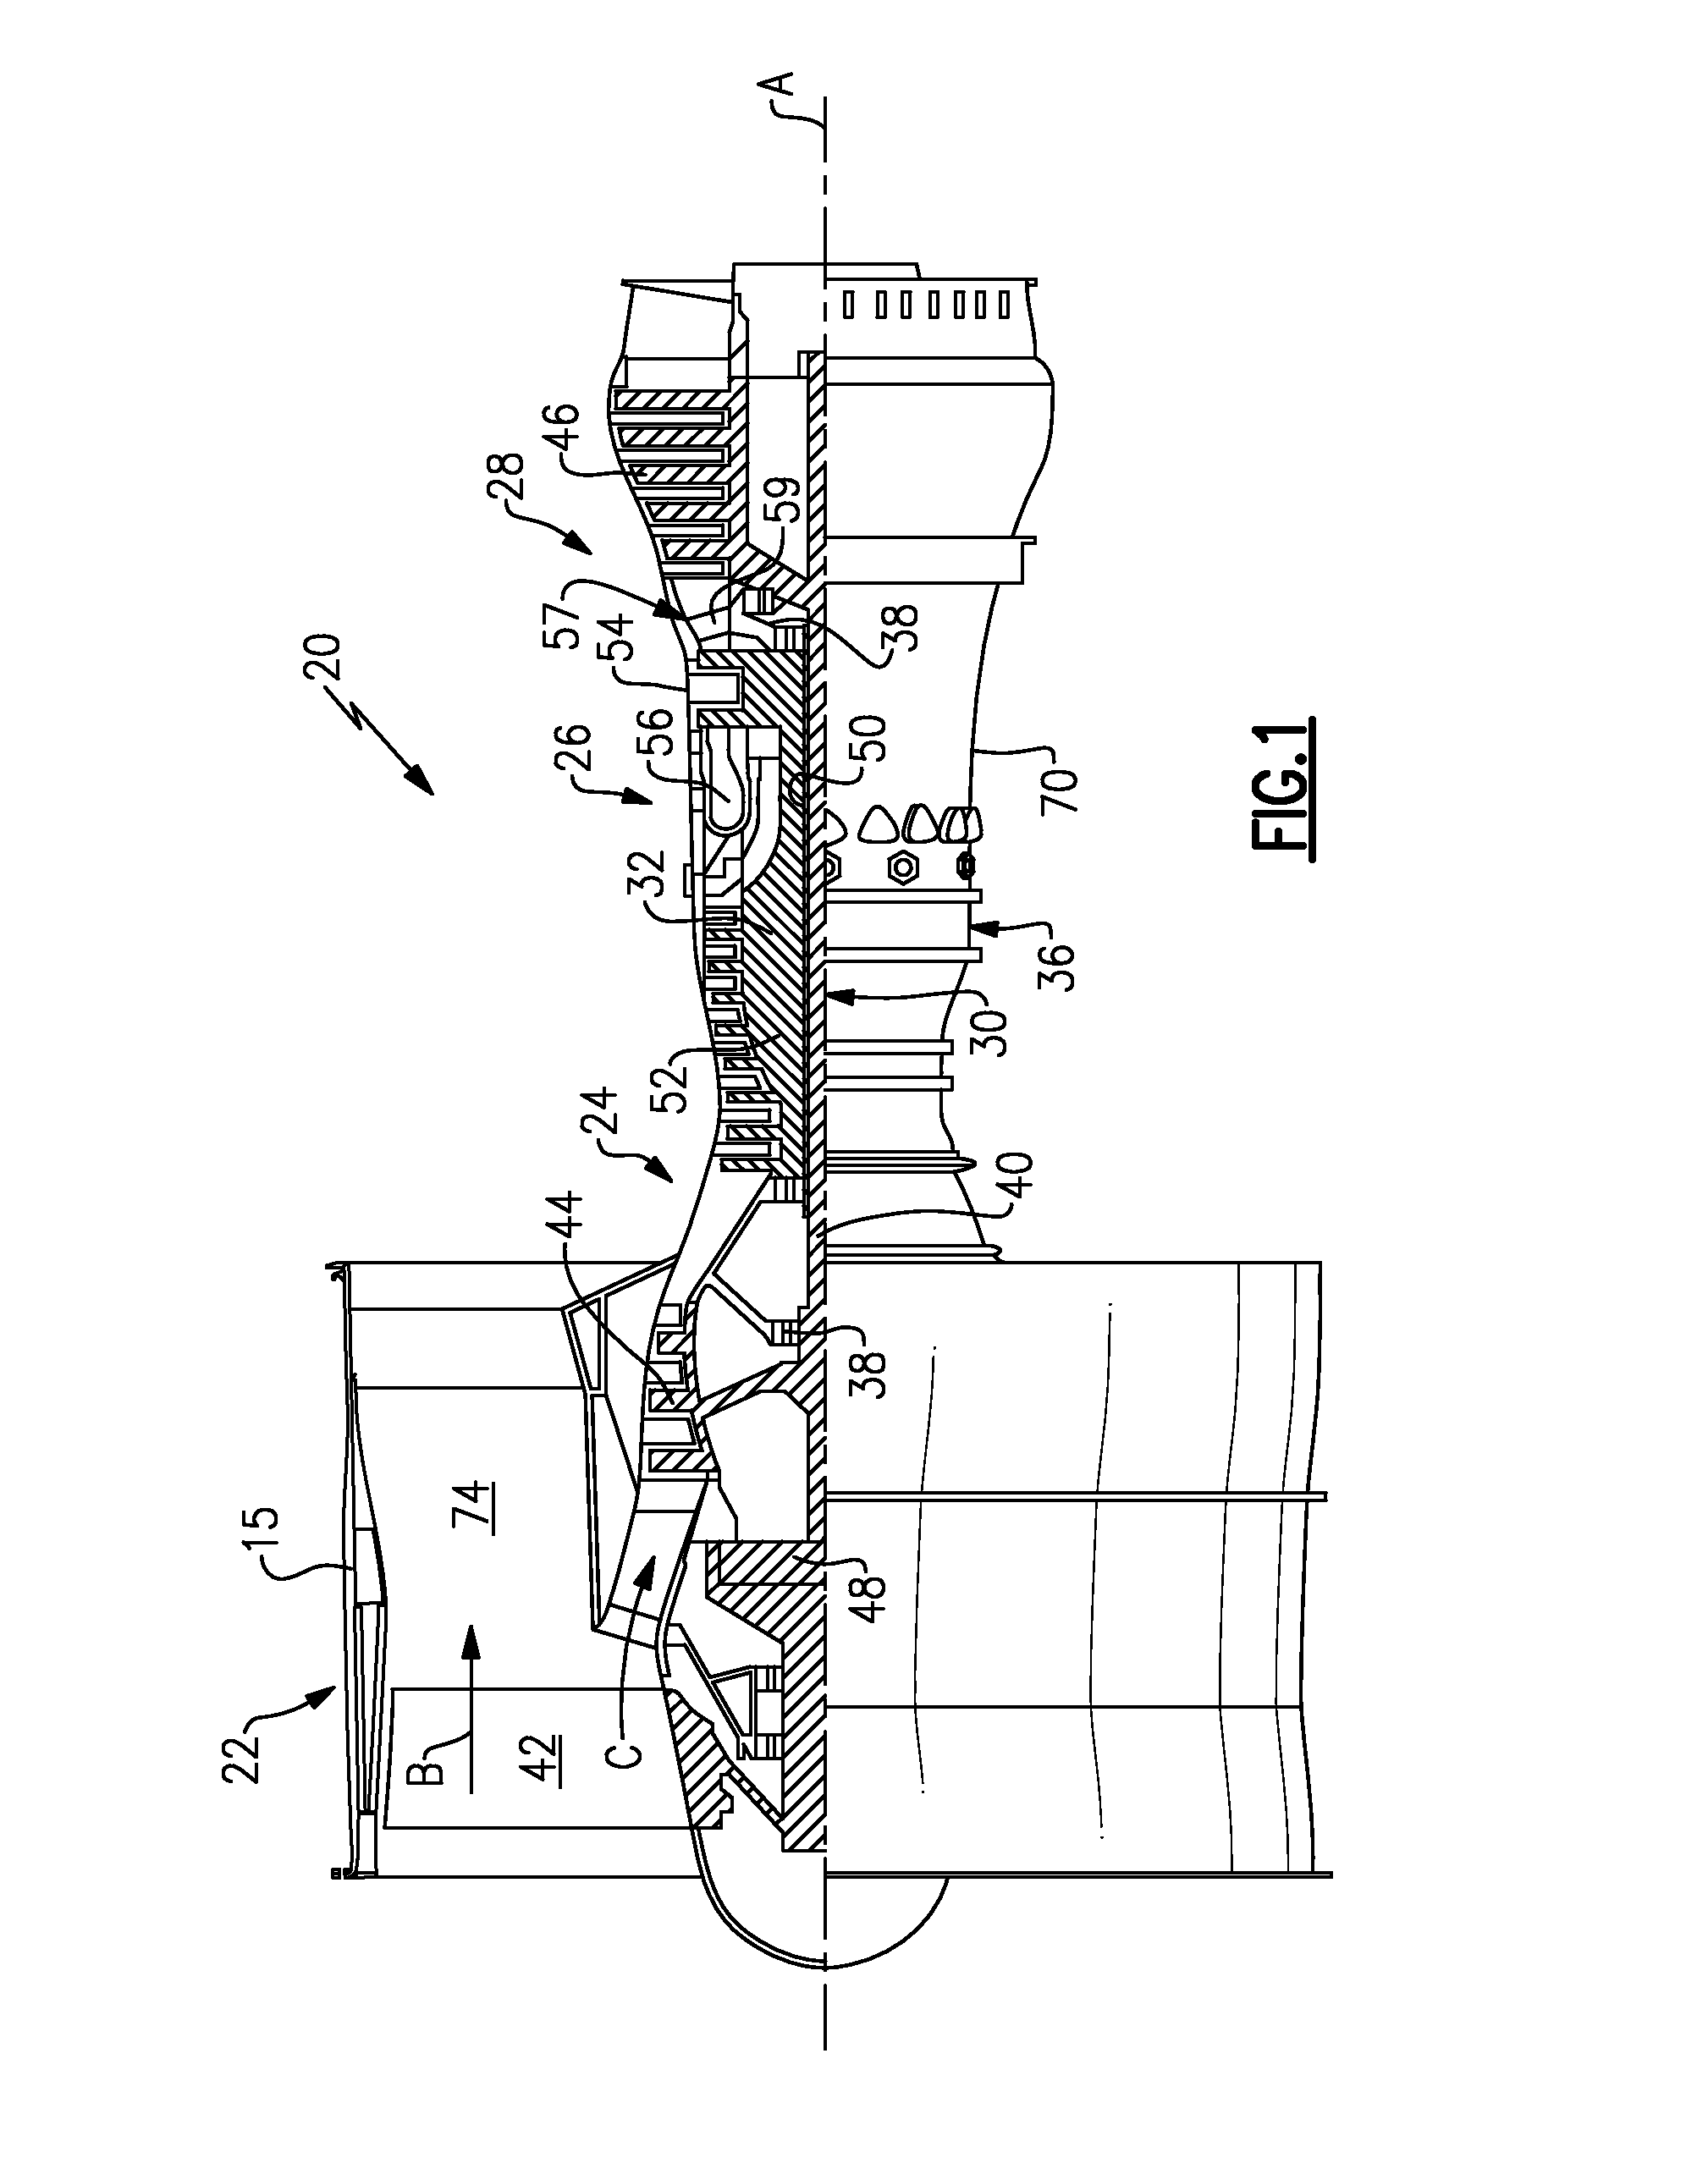 Thermal management system for a gas turbine engine